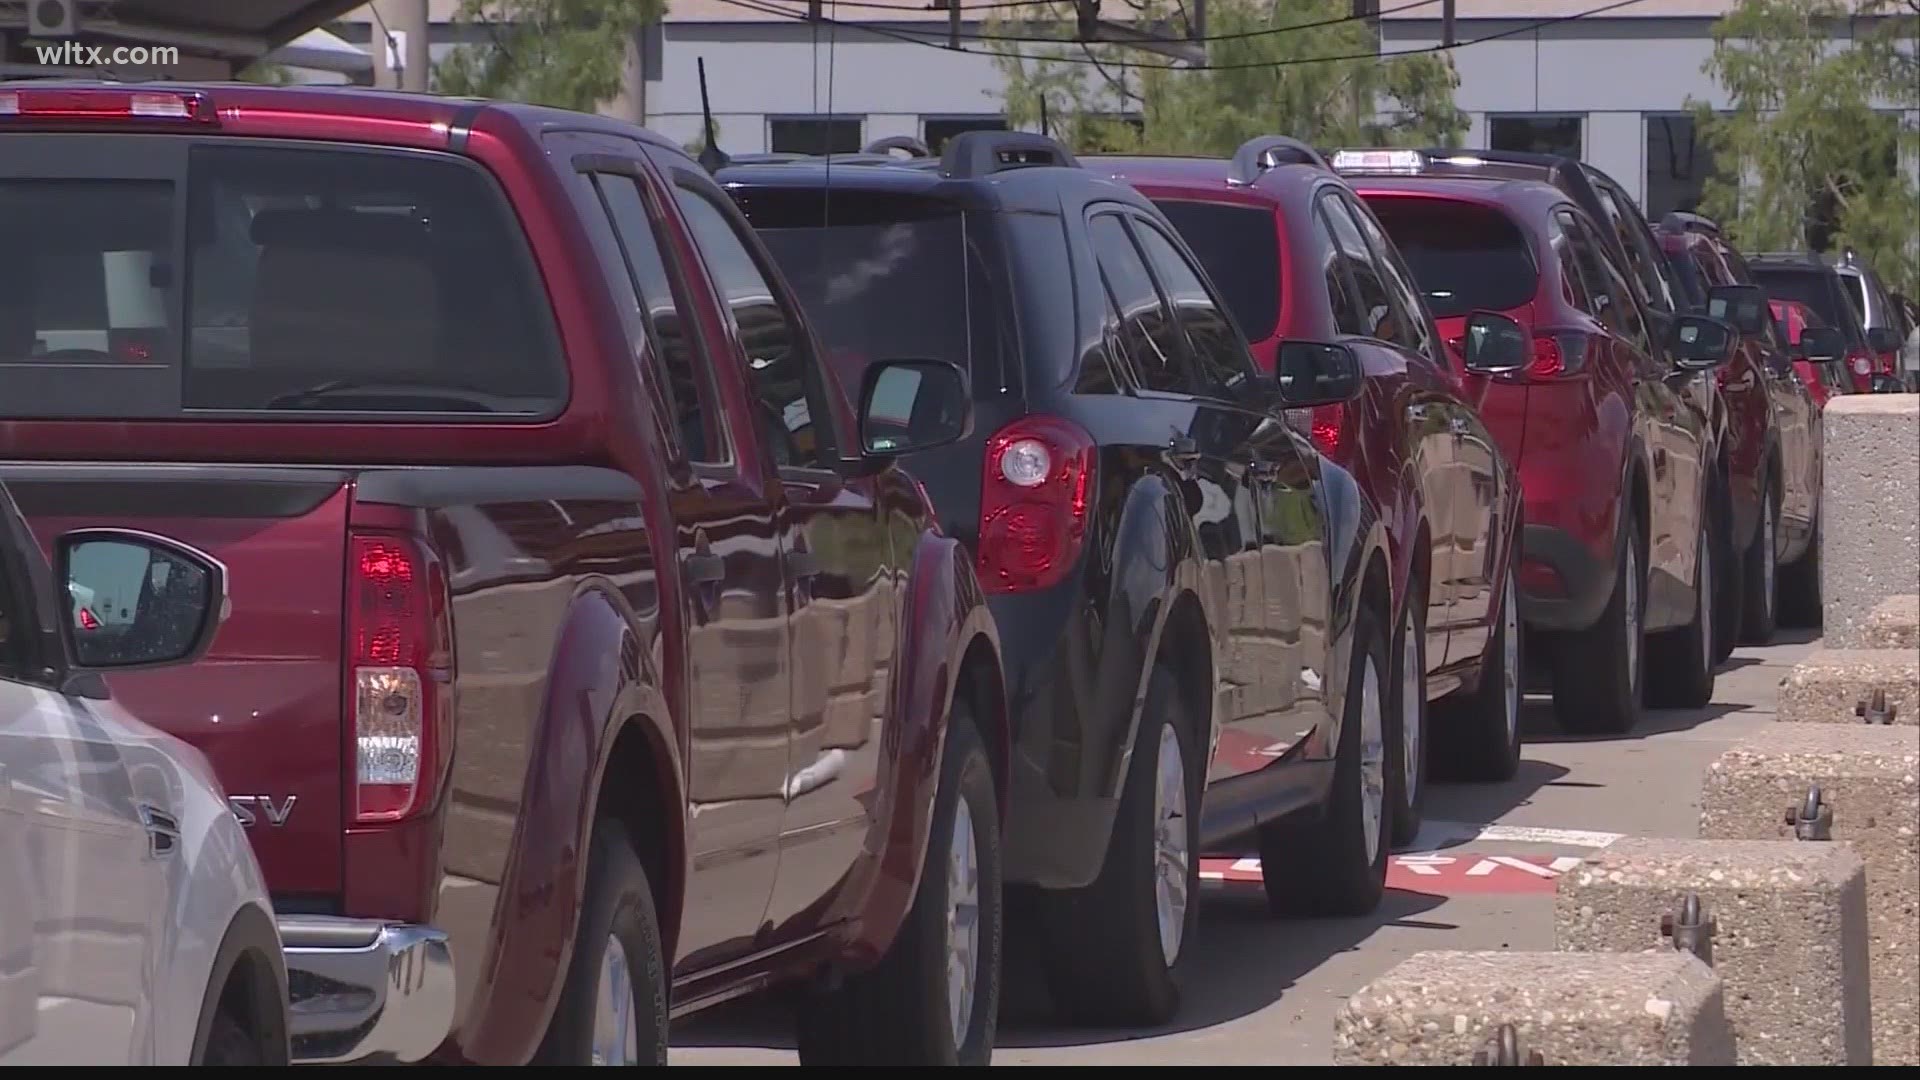 The president of the National Limousine Association says with more big events coming back along with a rental car shortage, their business is growing by the week.